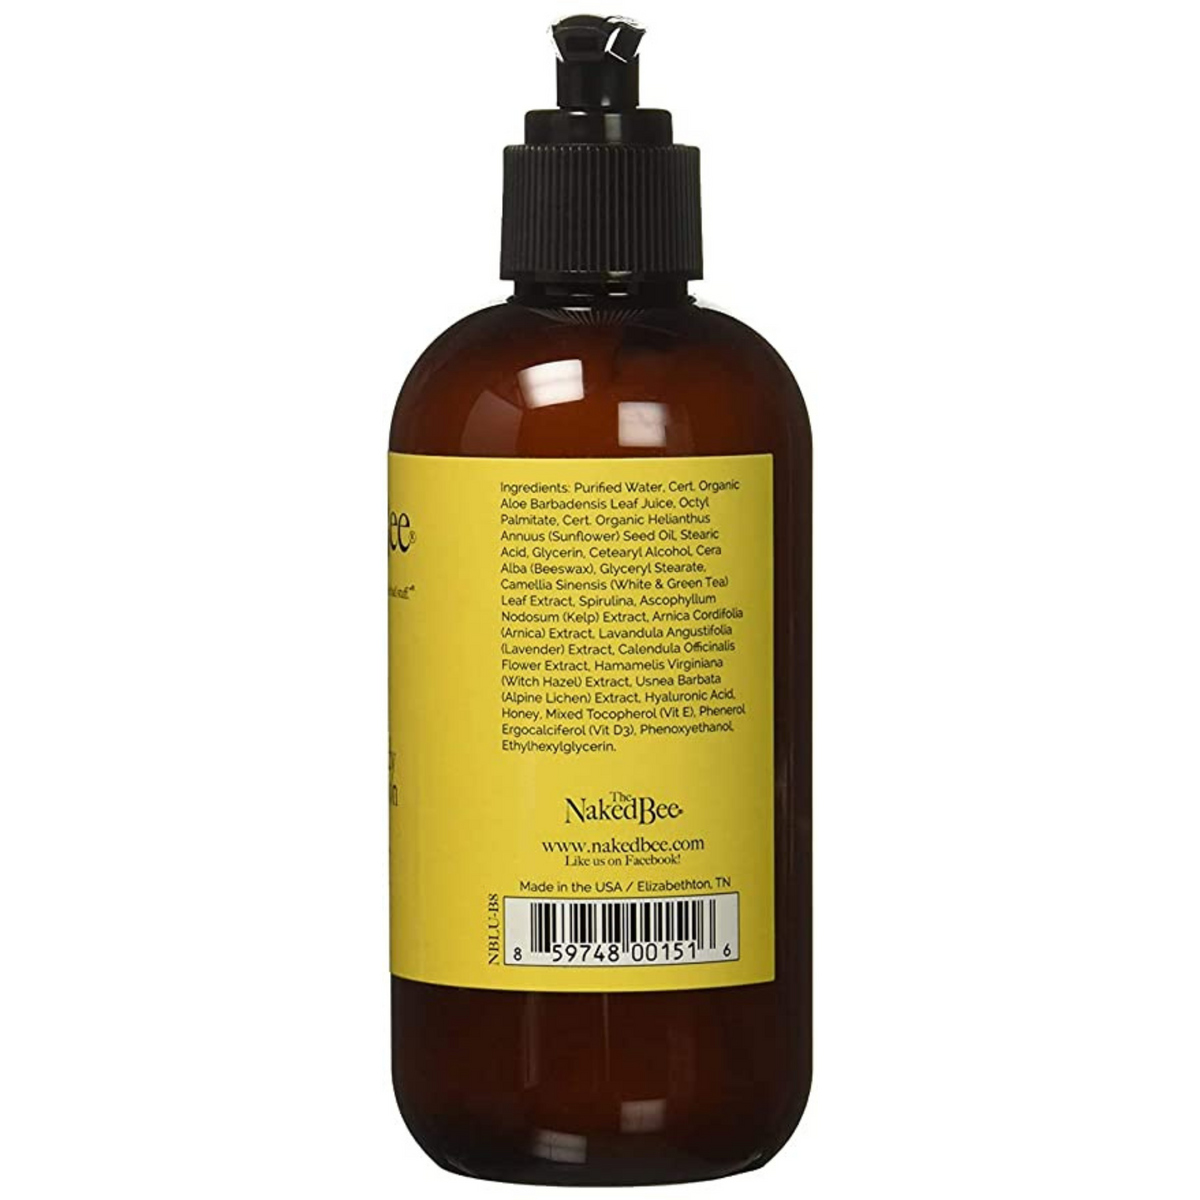 The Naked Bee Moisturizing Hand and Body Lotion (8 fl oz) #10086133